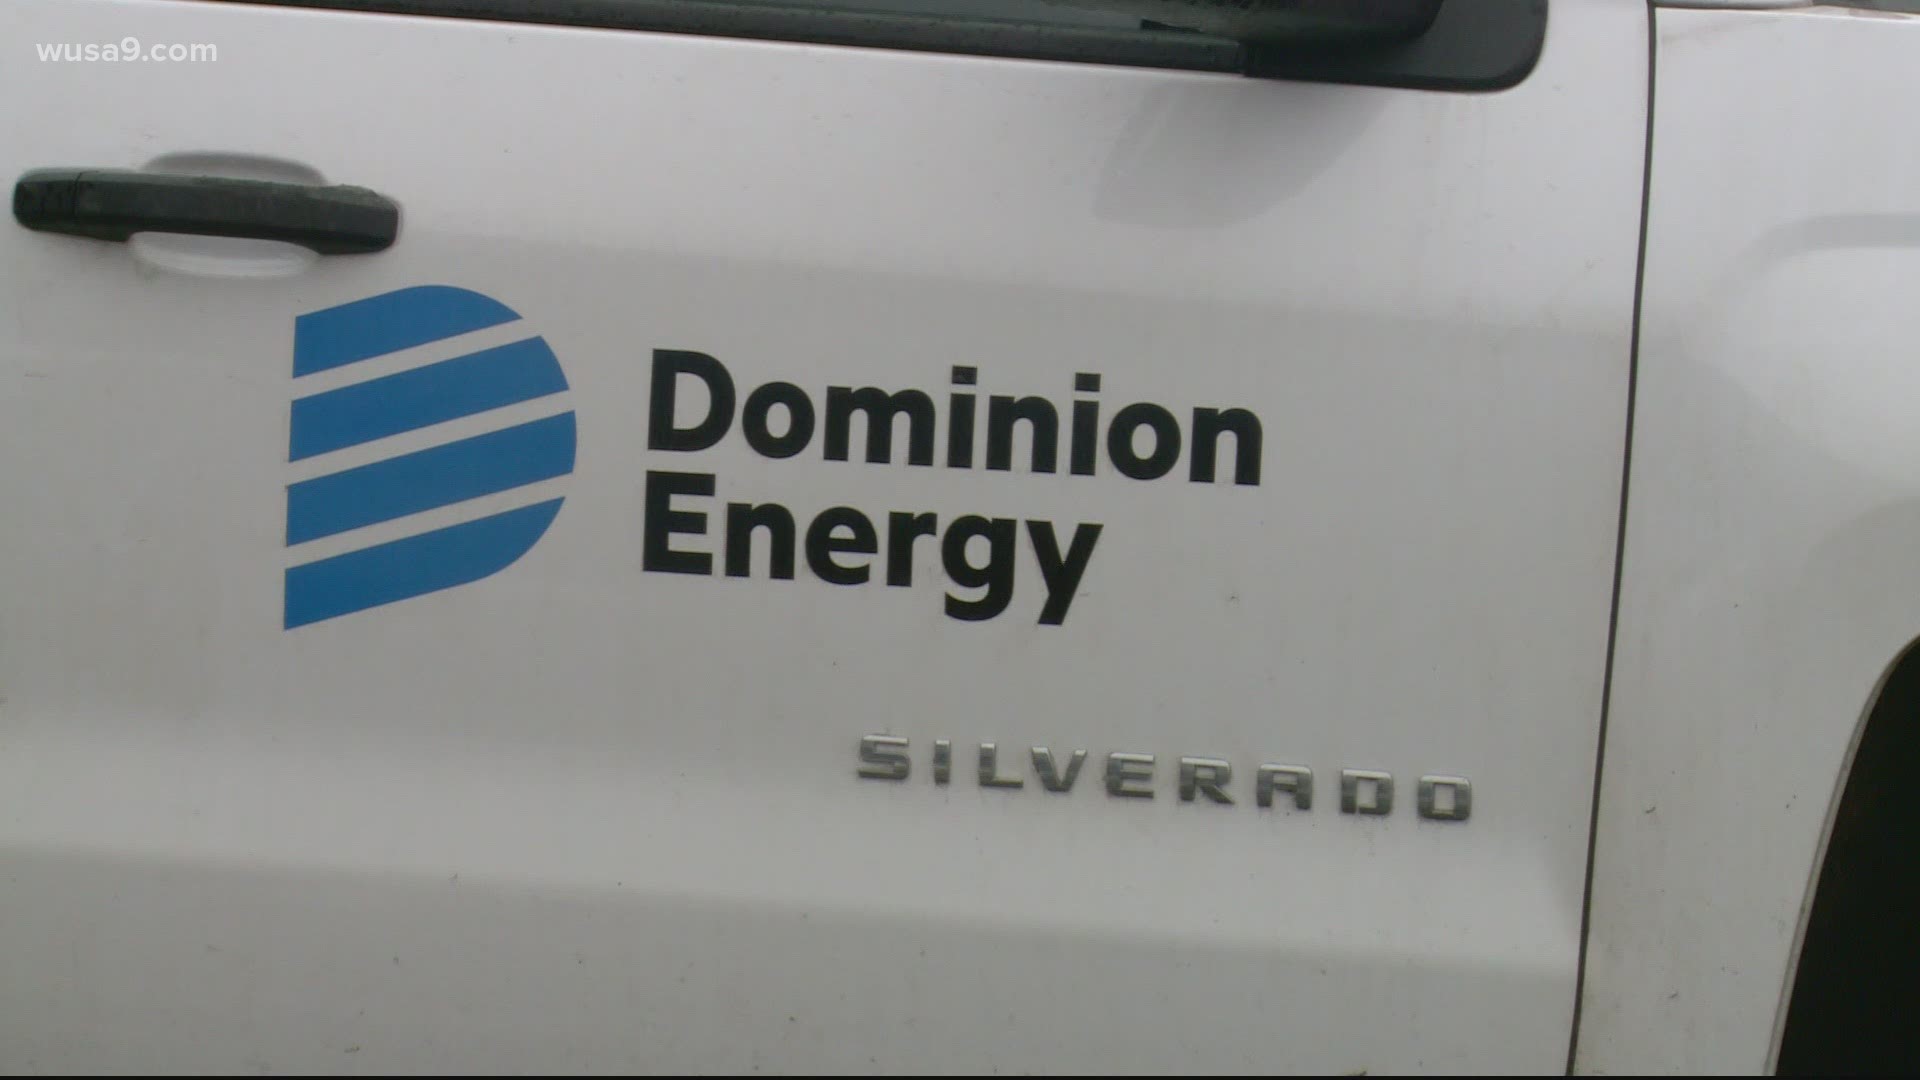 Parts of Virginia saw some pretty heavy ice and snow, too. Dominion Energy already dealt with major power outages after a storm earlier this week.